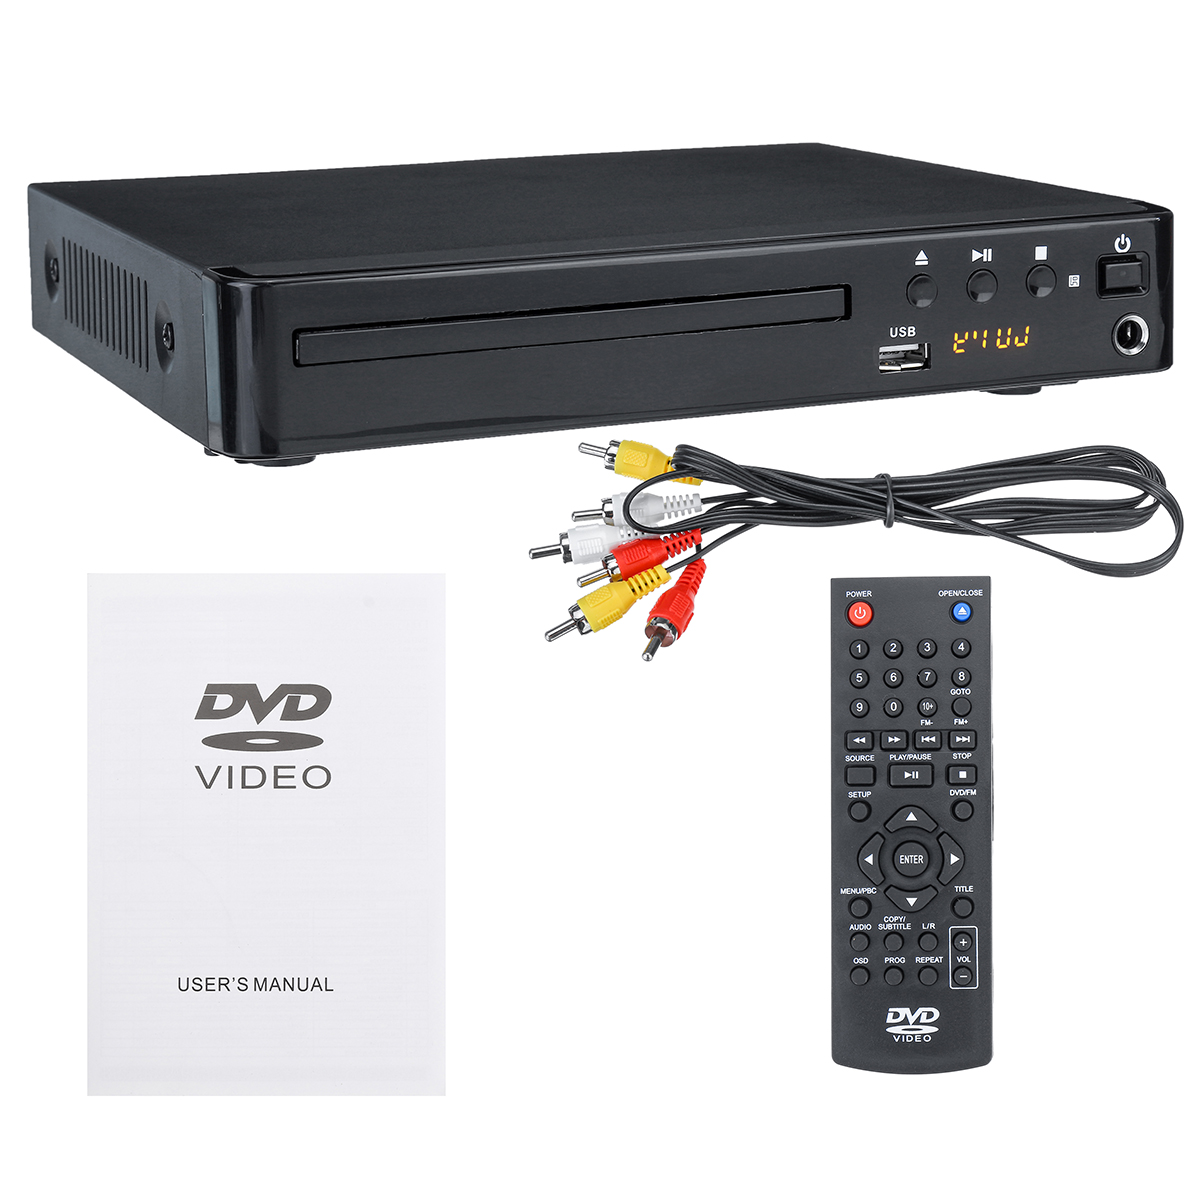 1080P-Full-HD-LCD-DVD-Player-Compact-6-Region-Stereo-Video-MP4-MP3-CD-USB-Remote-1699901-6